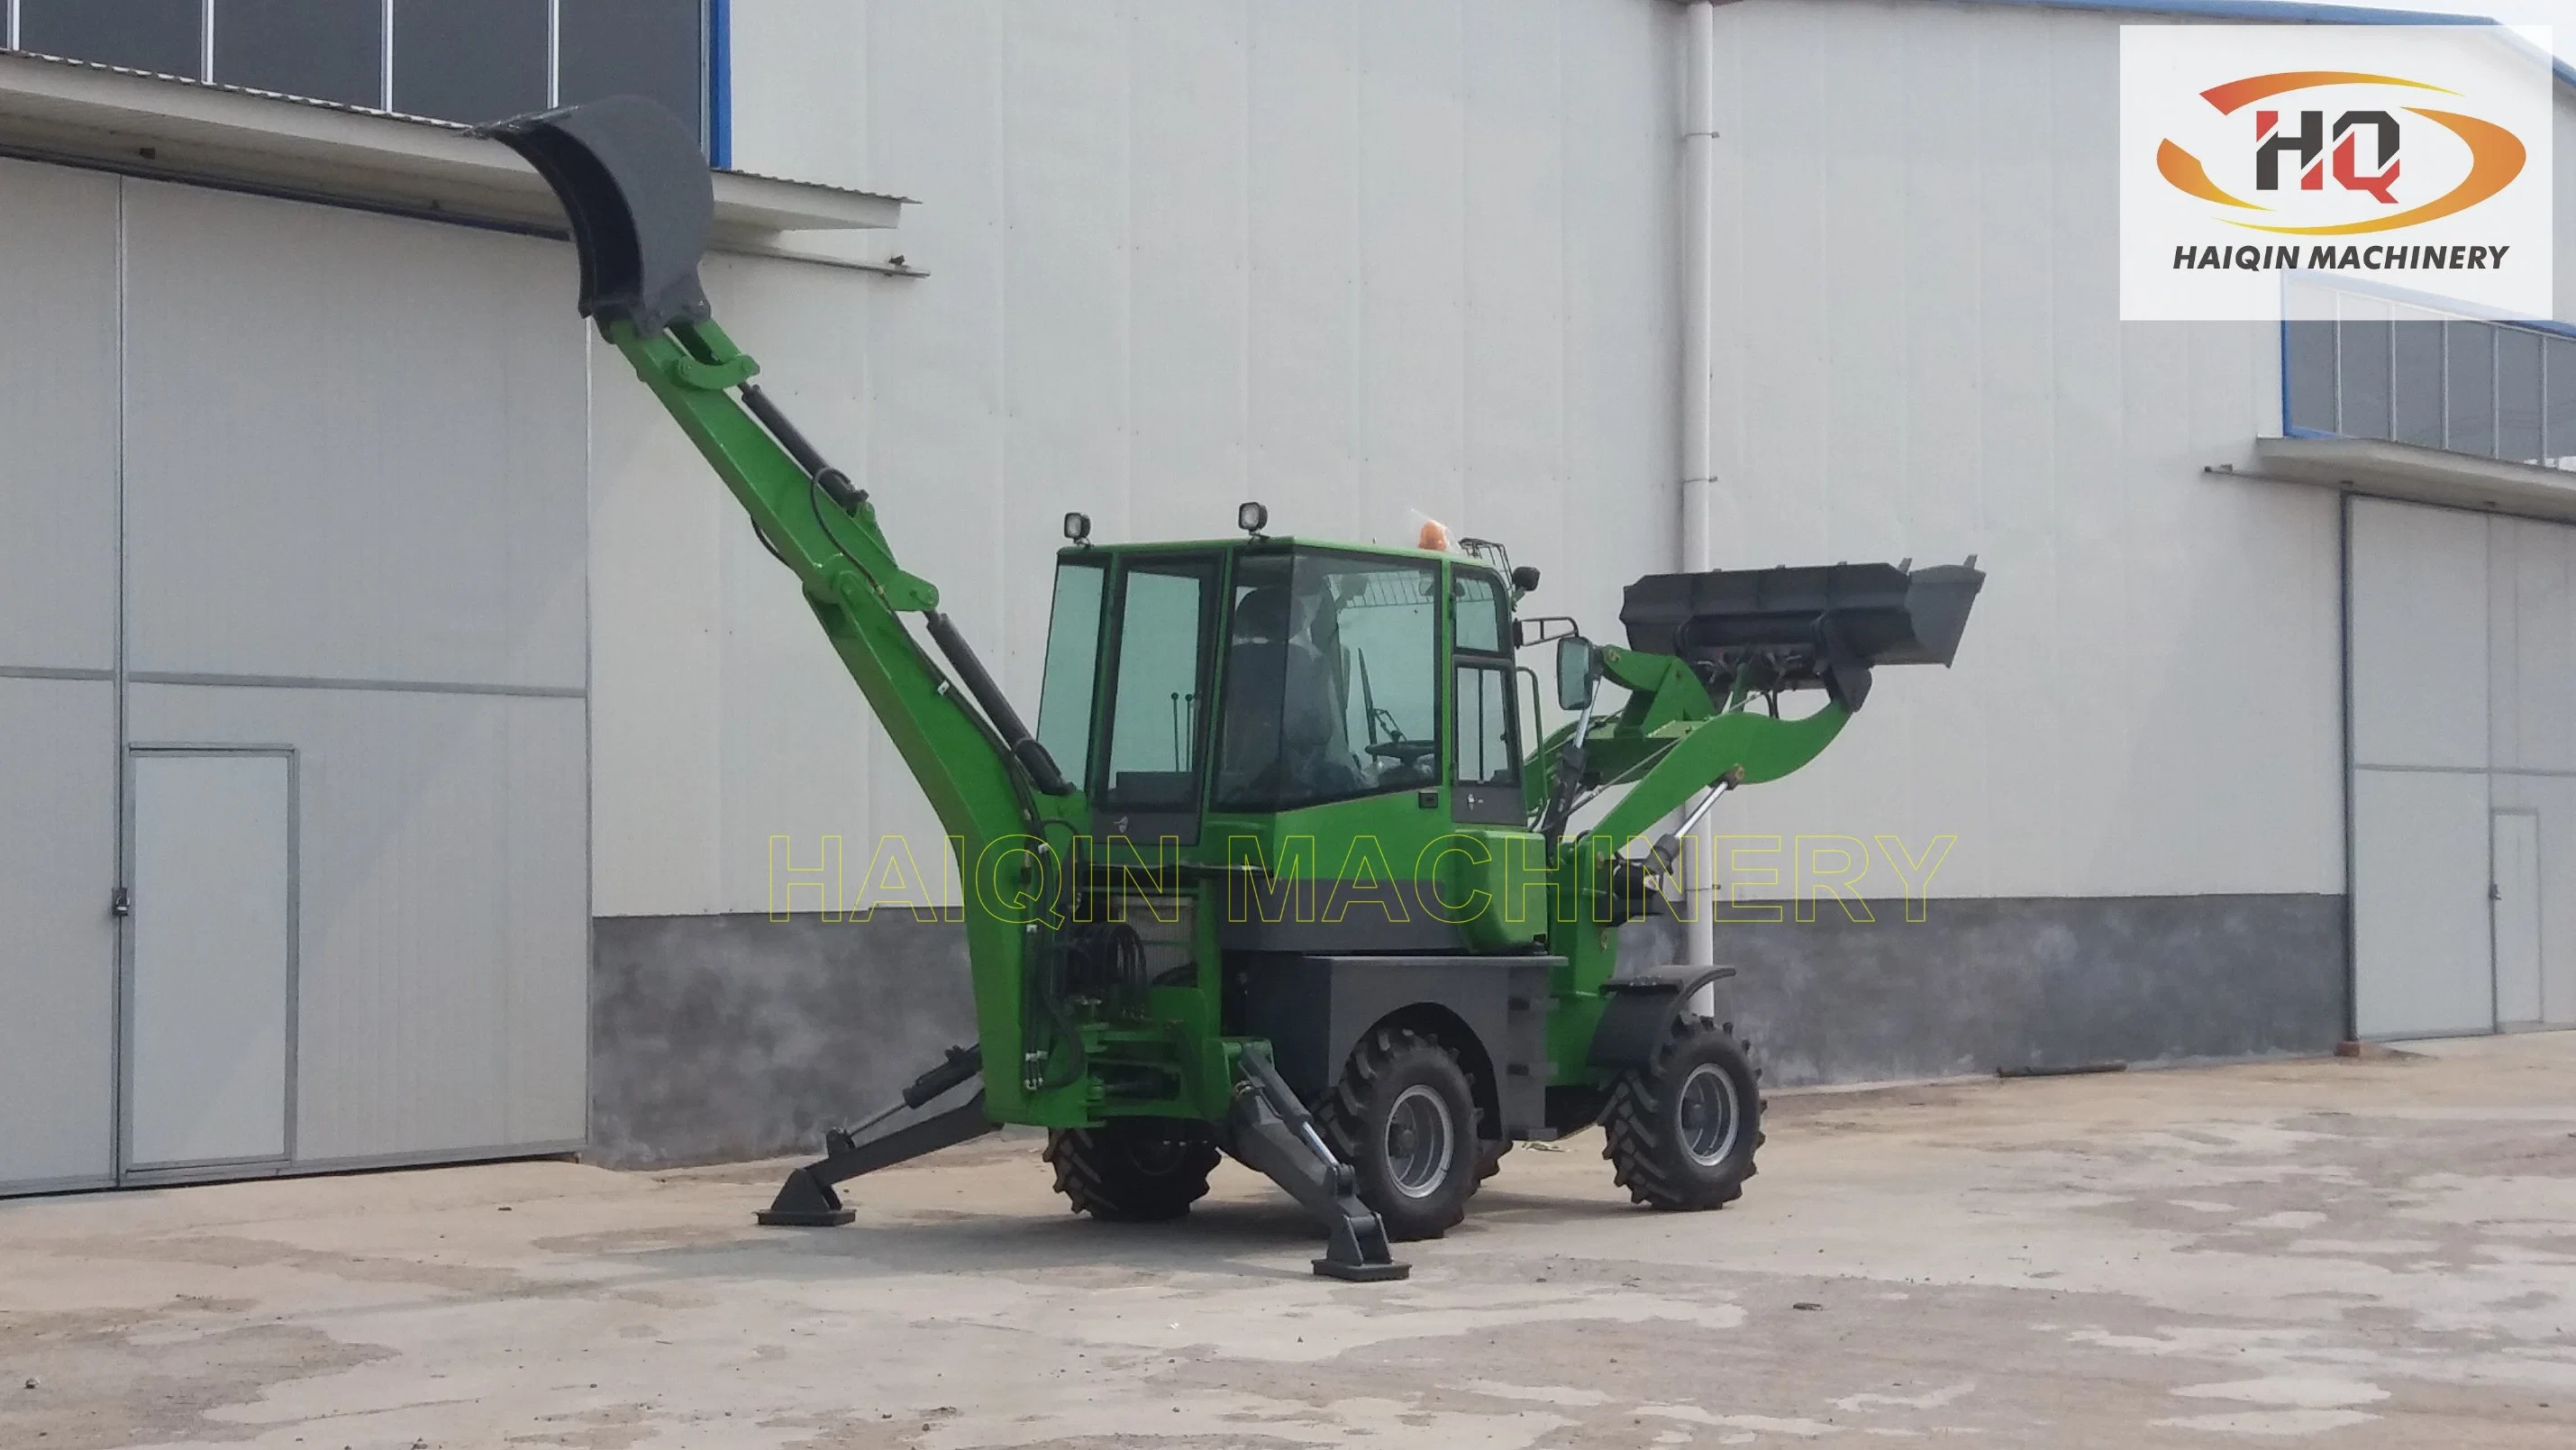 Haiqintop Made in China Mini Backhoe Loader (WZ15-10) for Sales